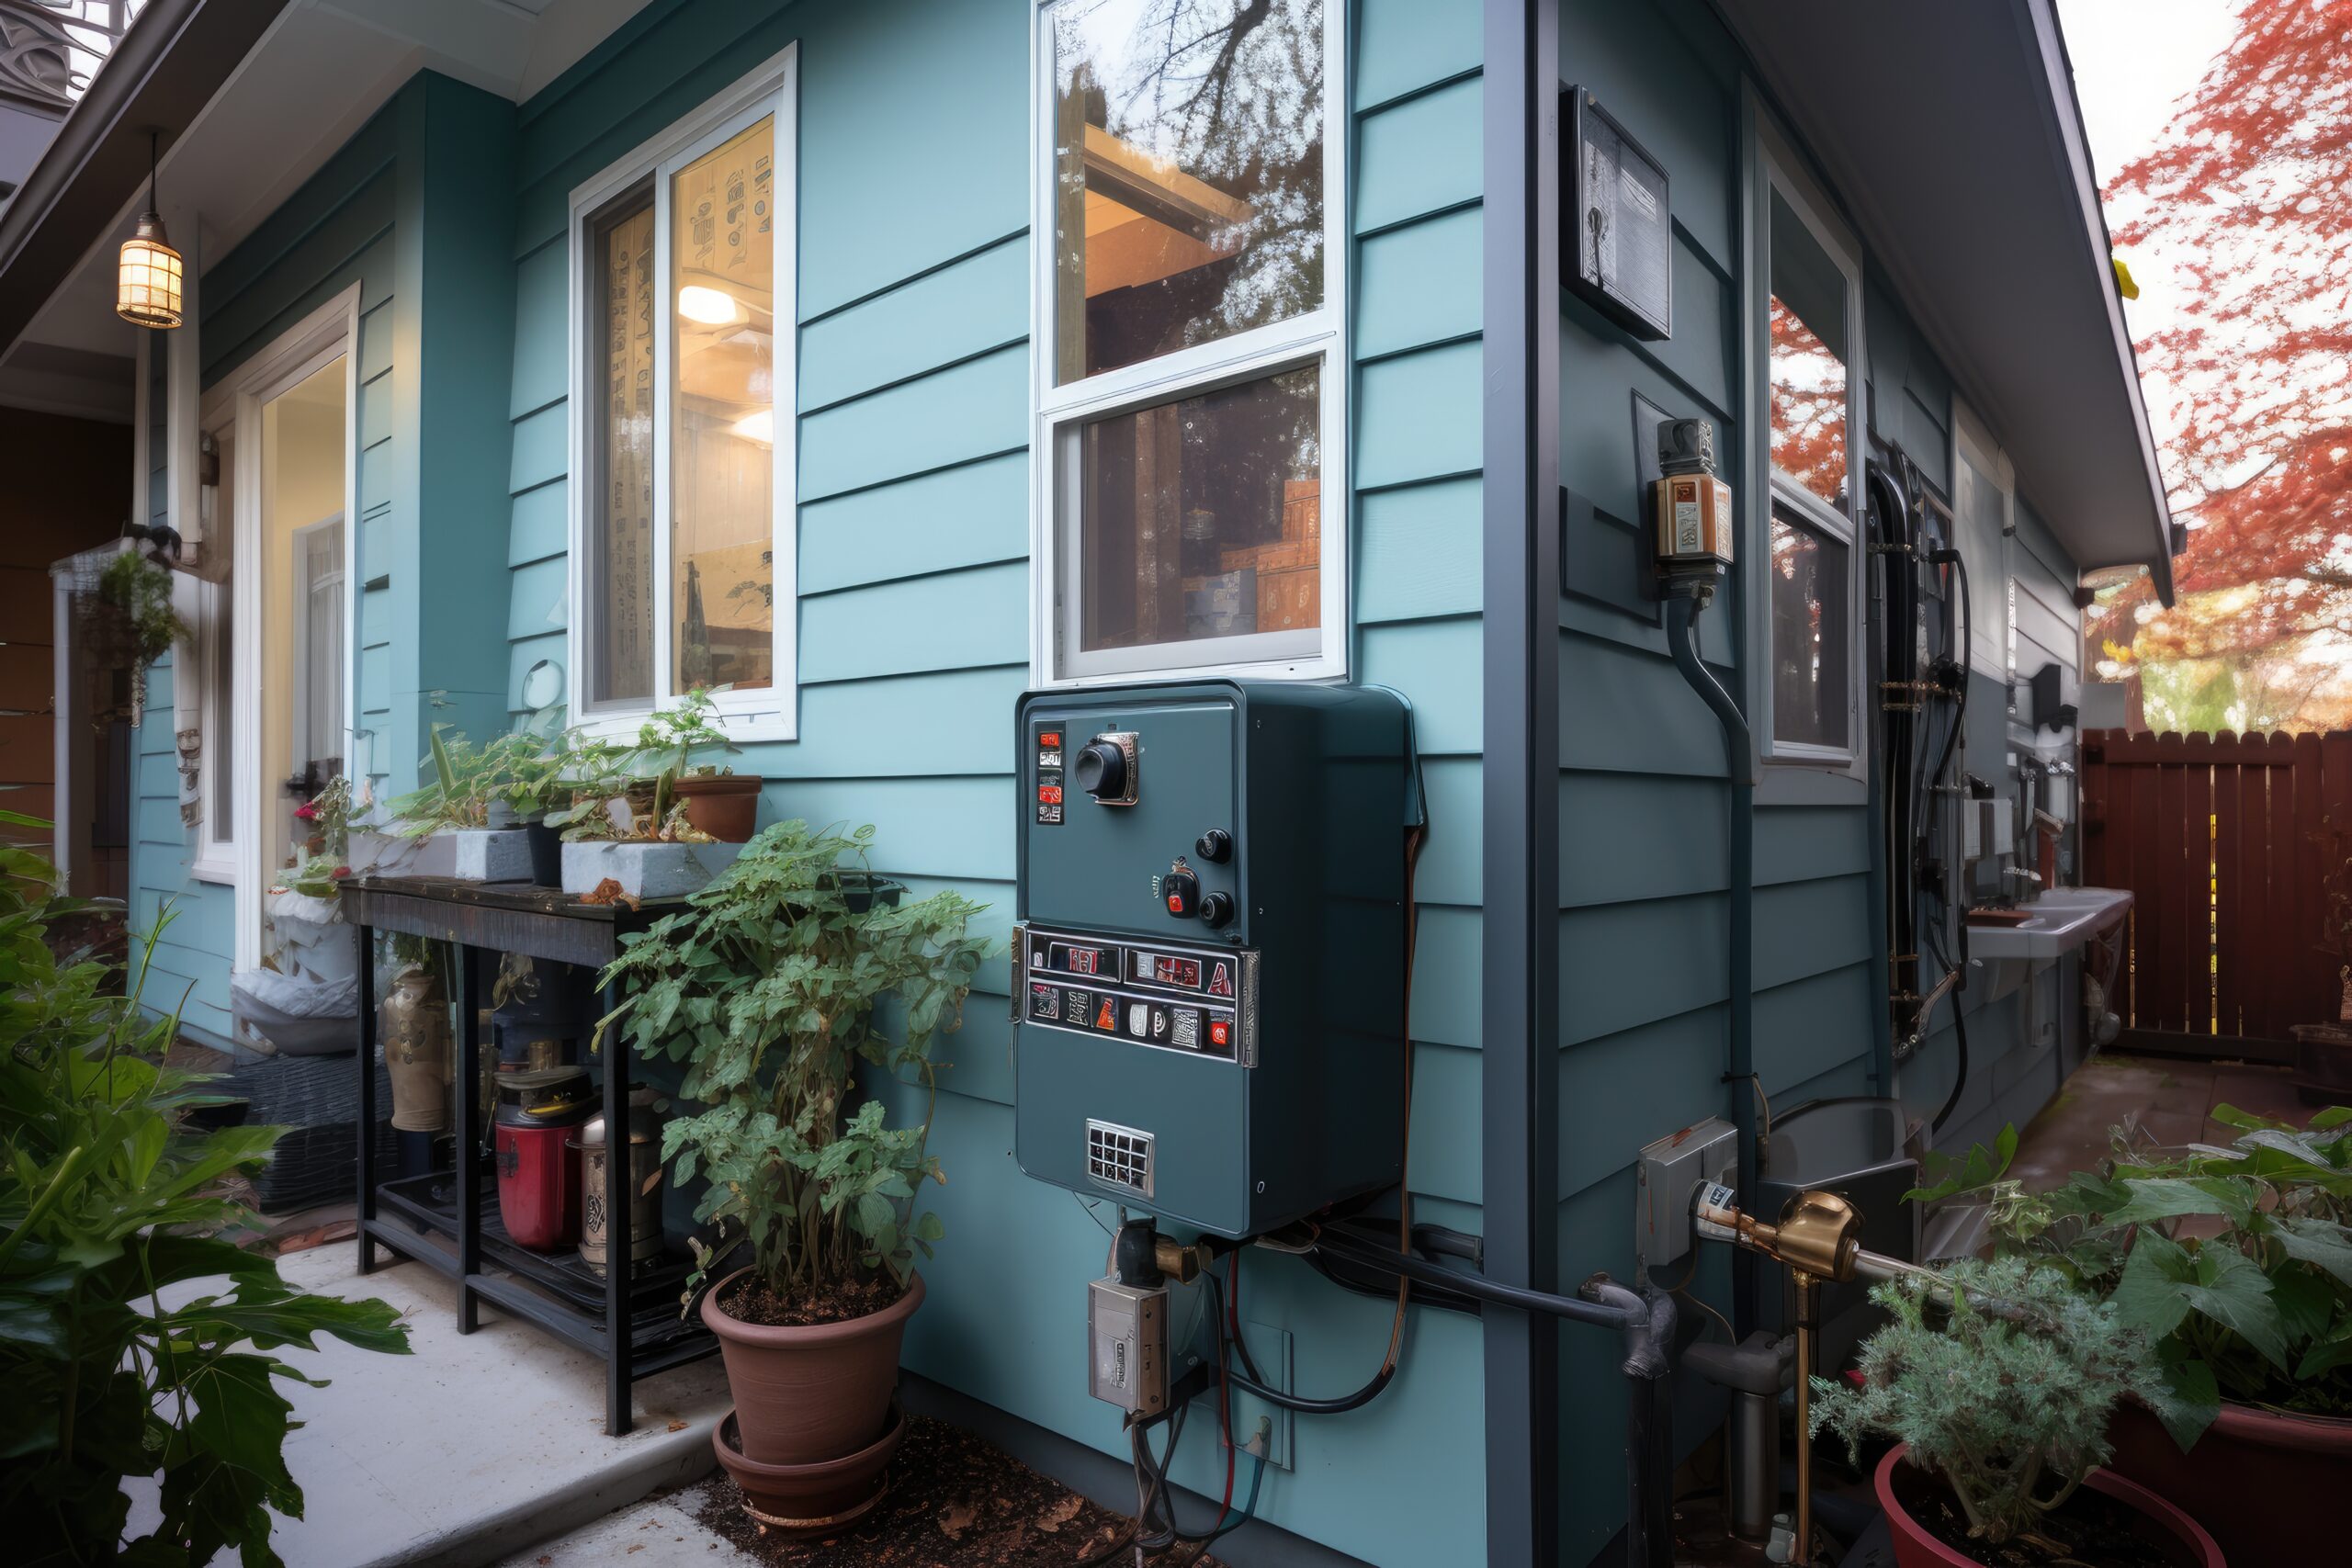 www.appr.com : Which generator type is best for home use?